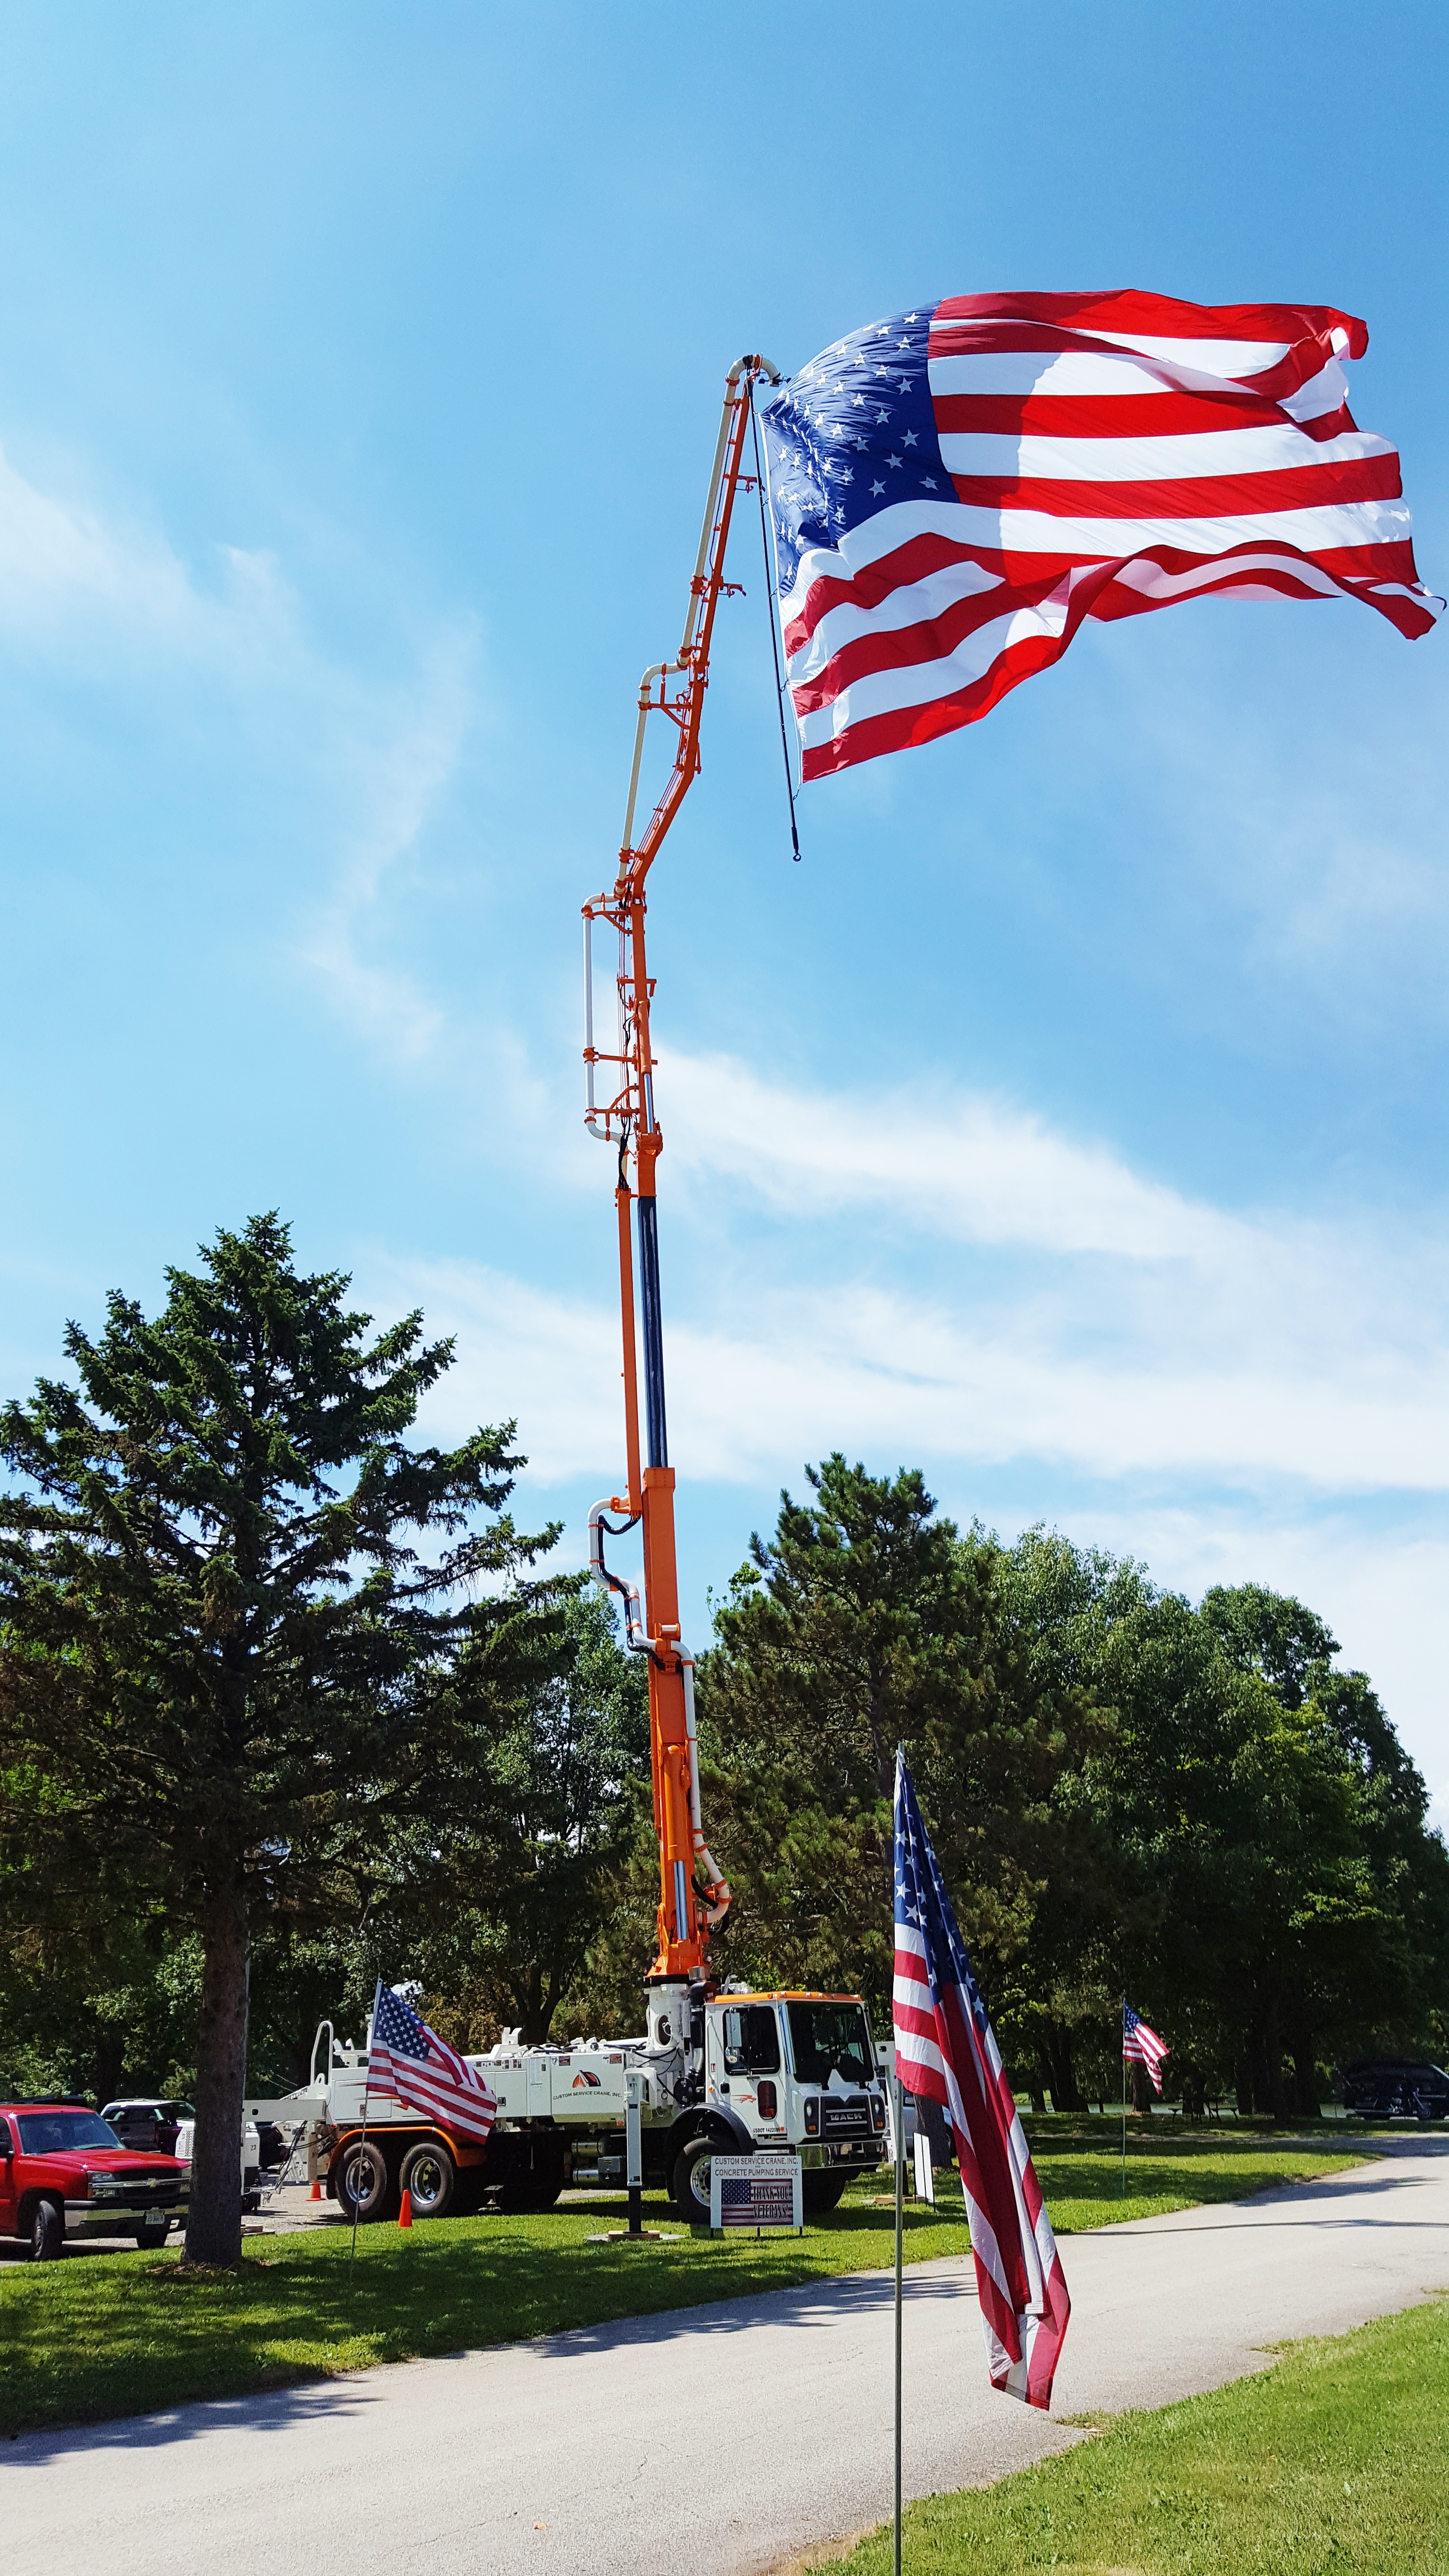 31 meter hoisting our nations flag for Veterans Day in Mahomet, IL.